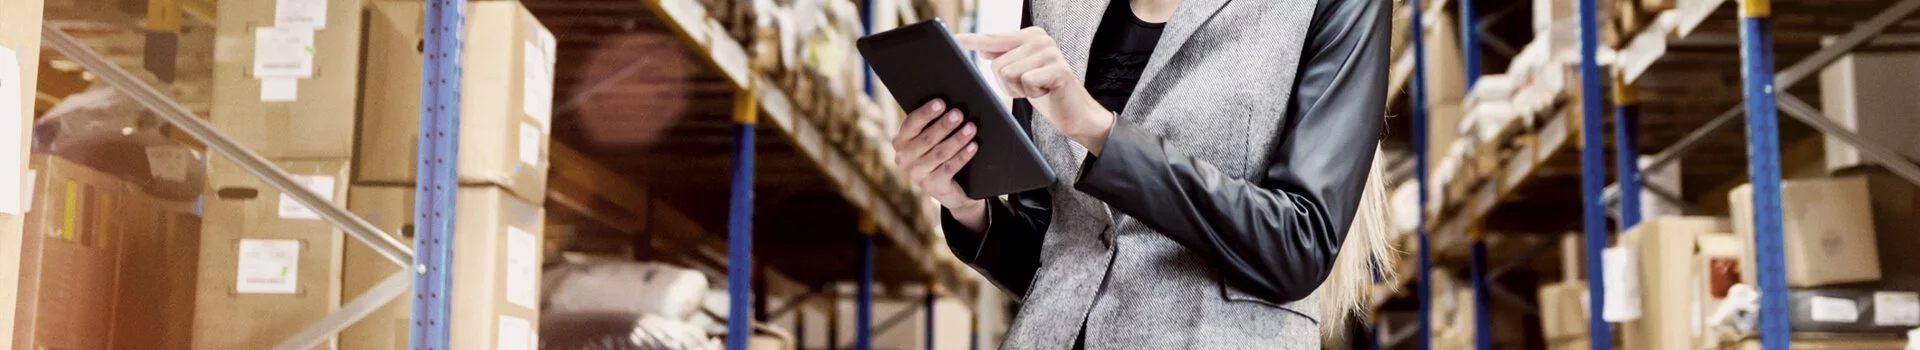 Woman on Tablet in Warehouse